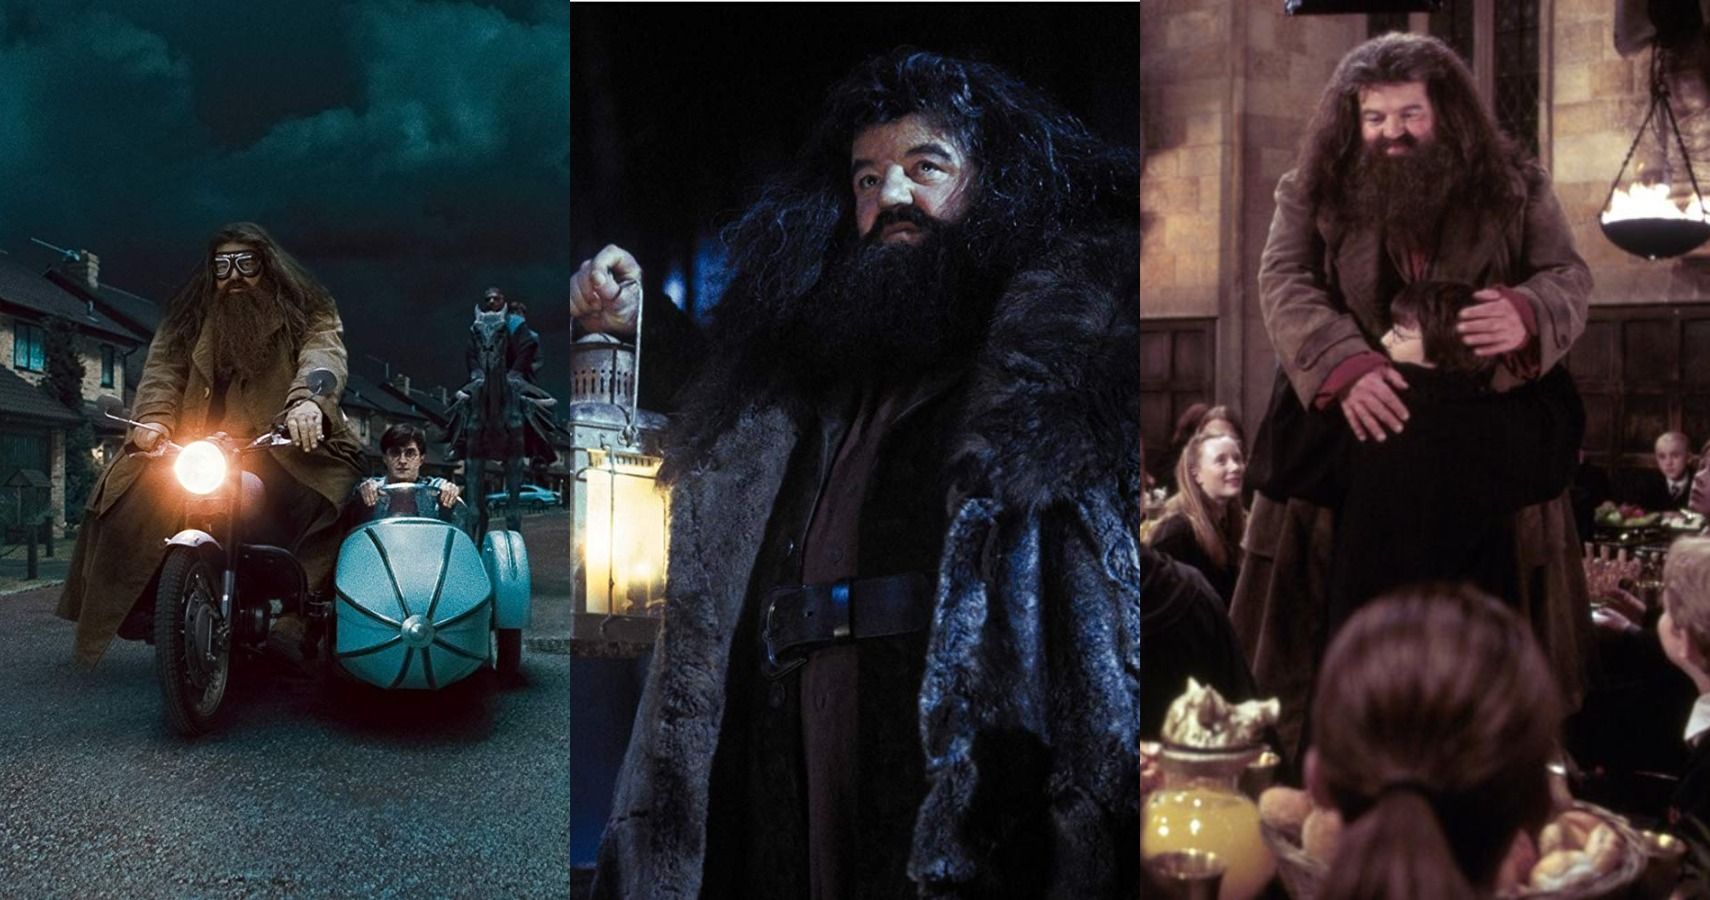 Harry Potter 10 Biggest Ways Hagrid Changed From Philosophers Stone To Deathly Hallows